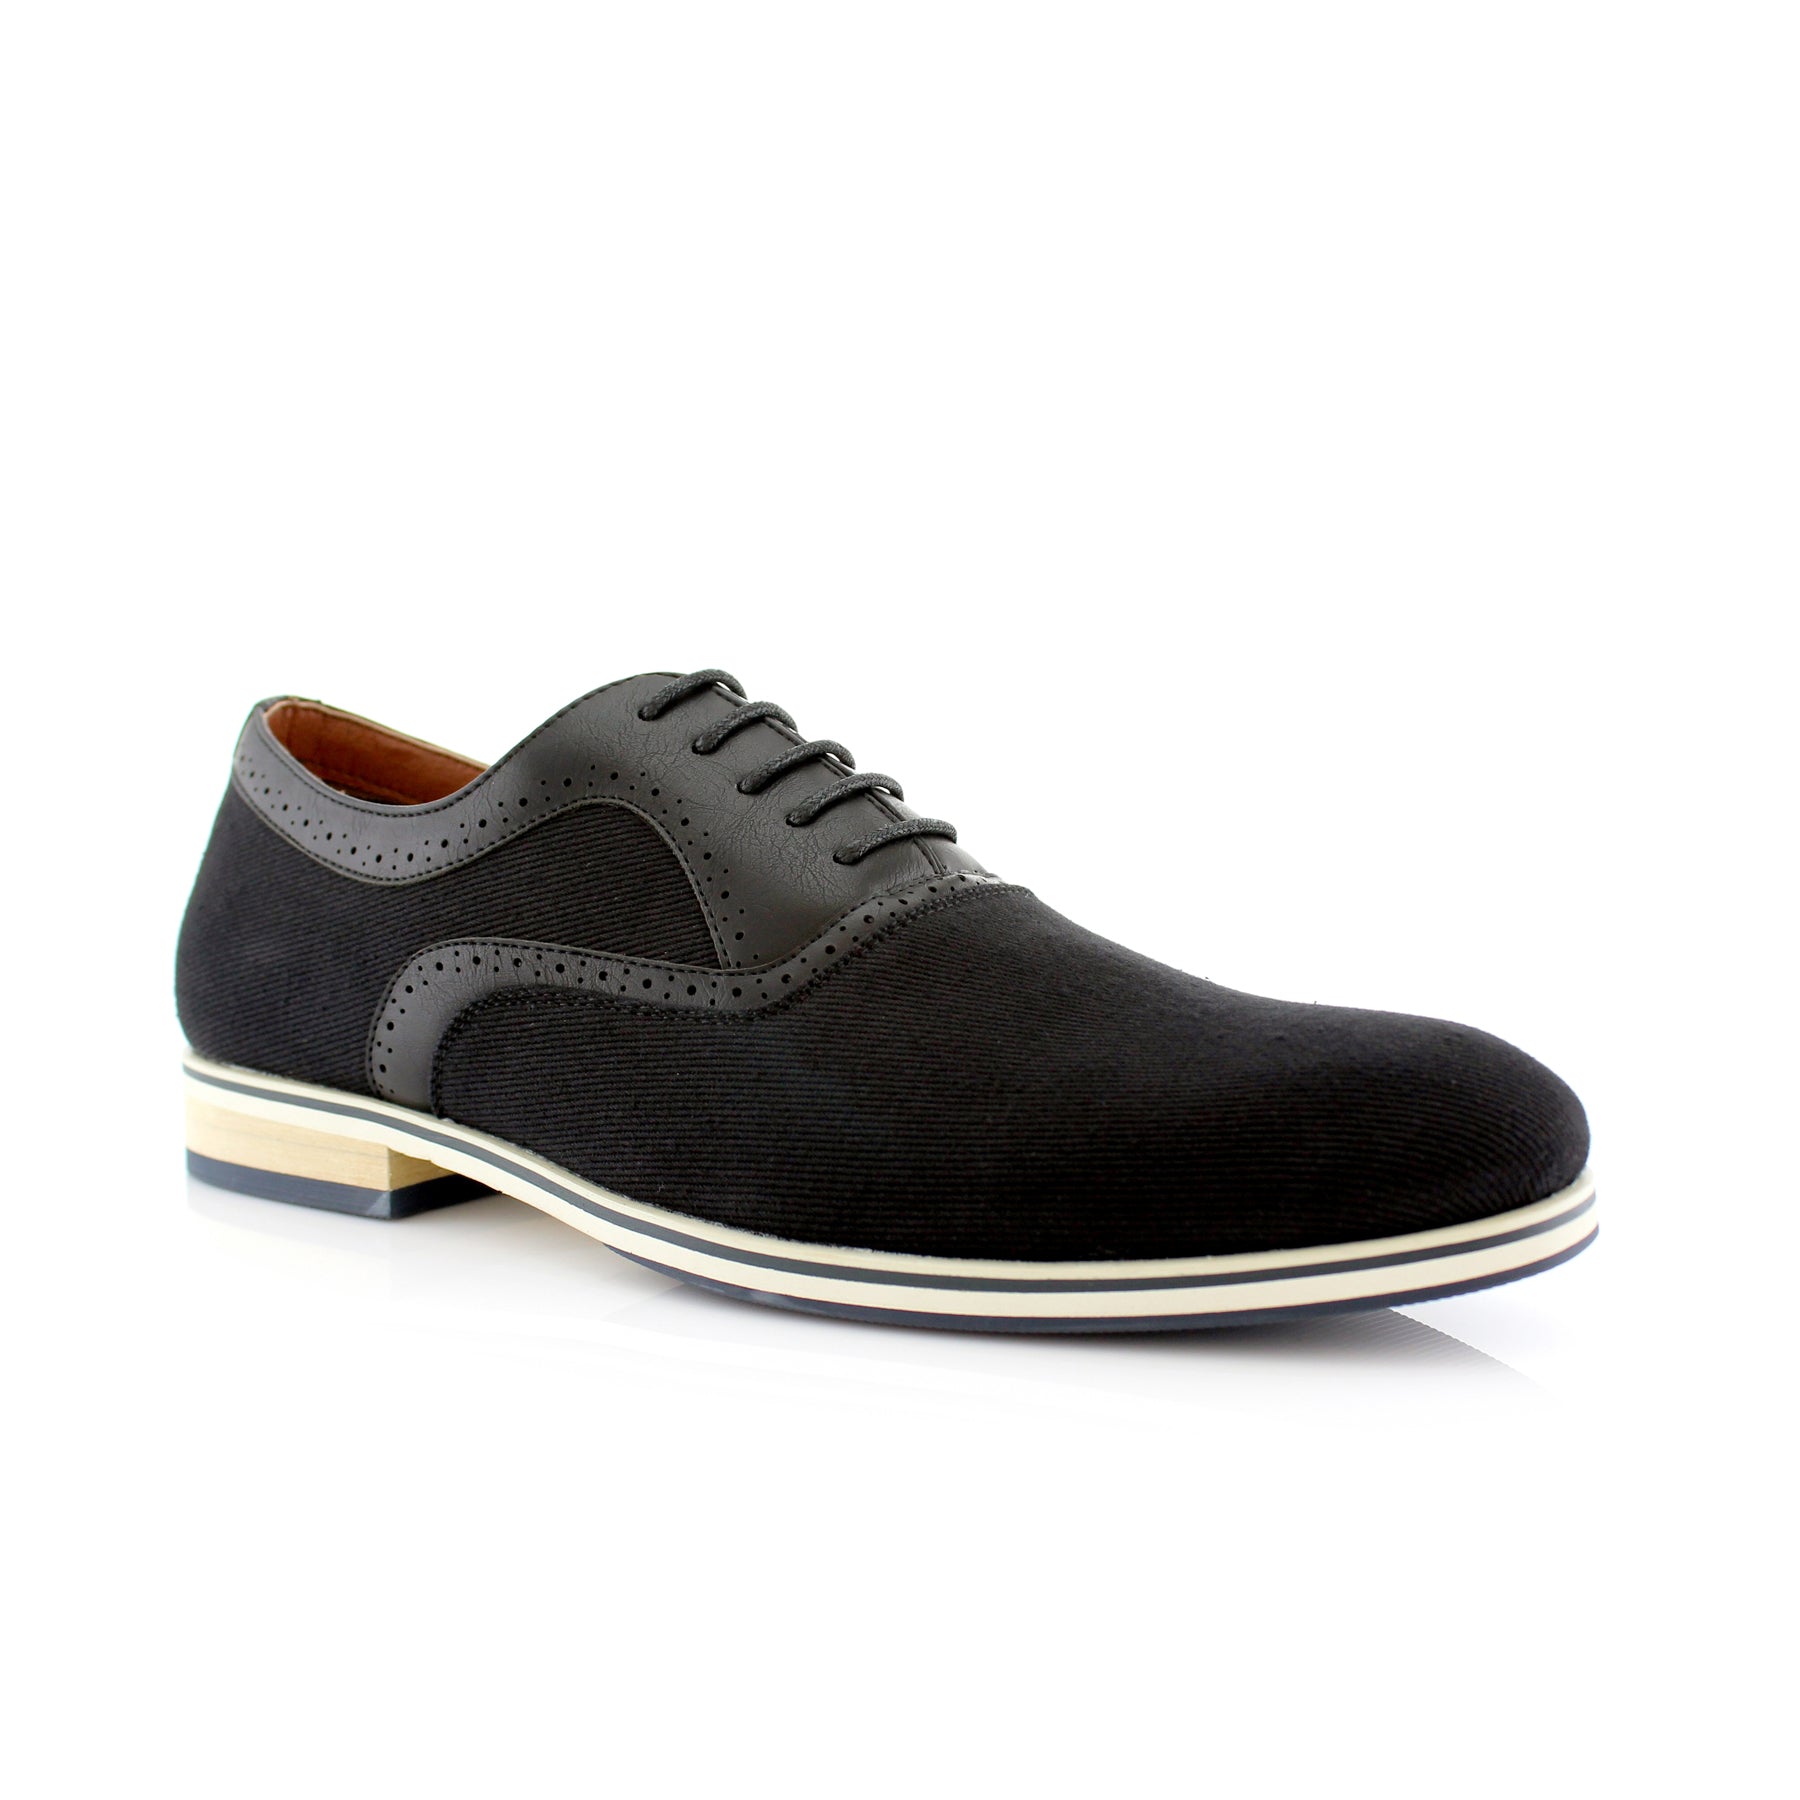 Duo-Textured Casual Oxfords | Edmonds by Ferro Aldo | Conal Footwear | Main Angle View